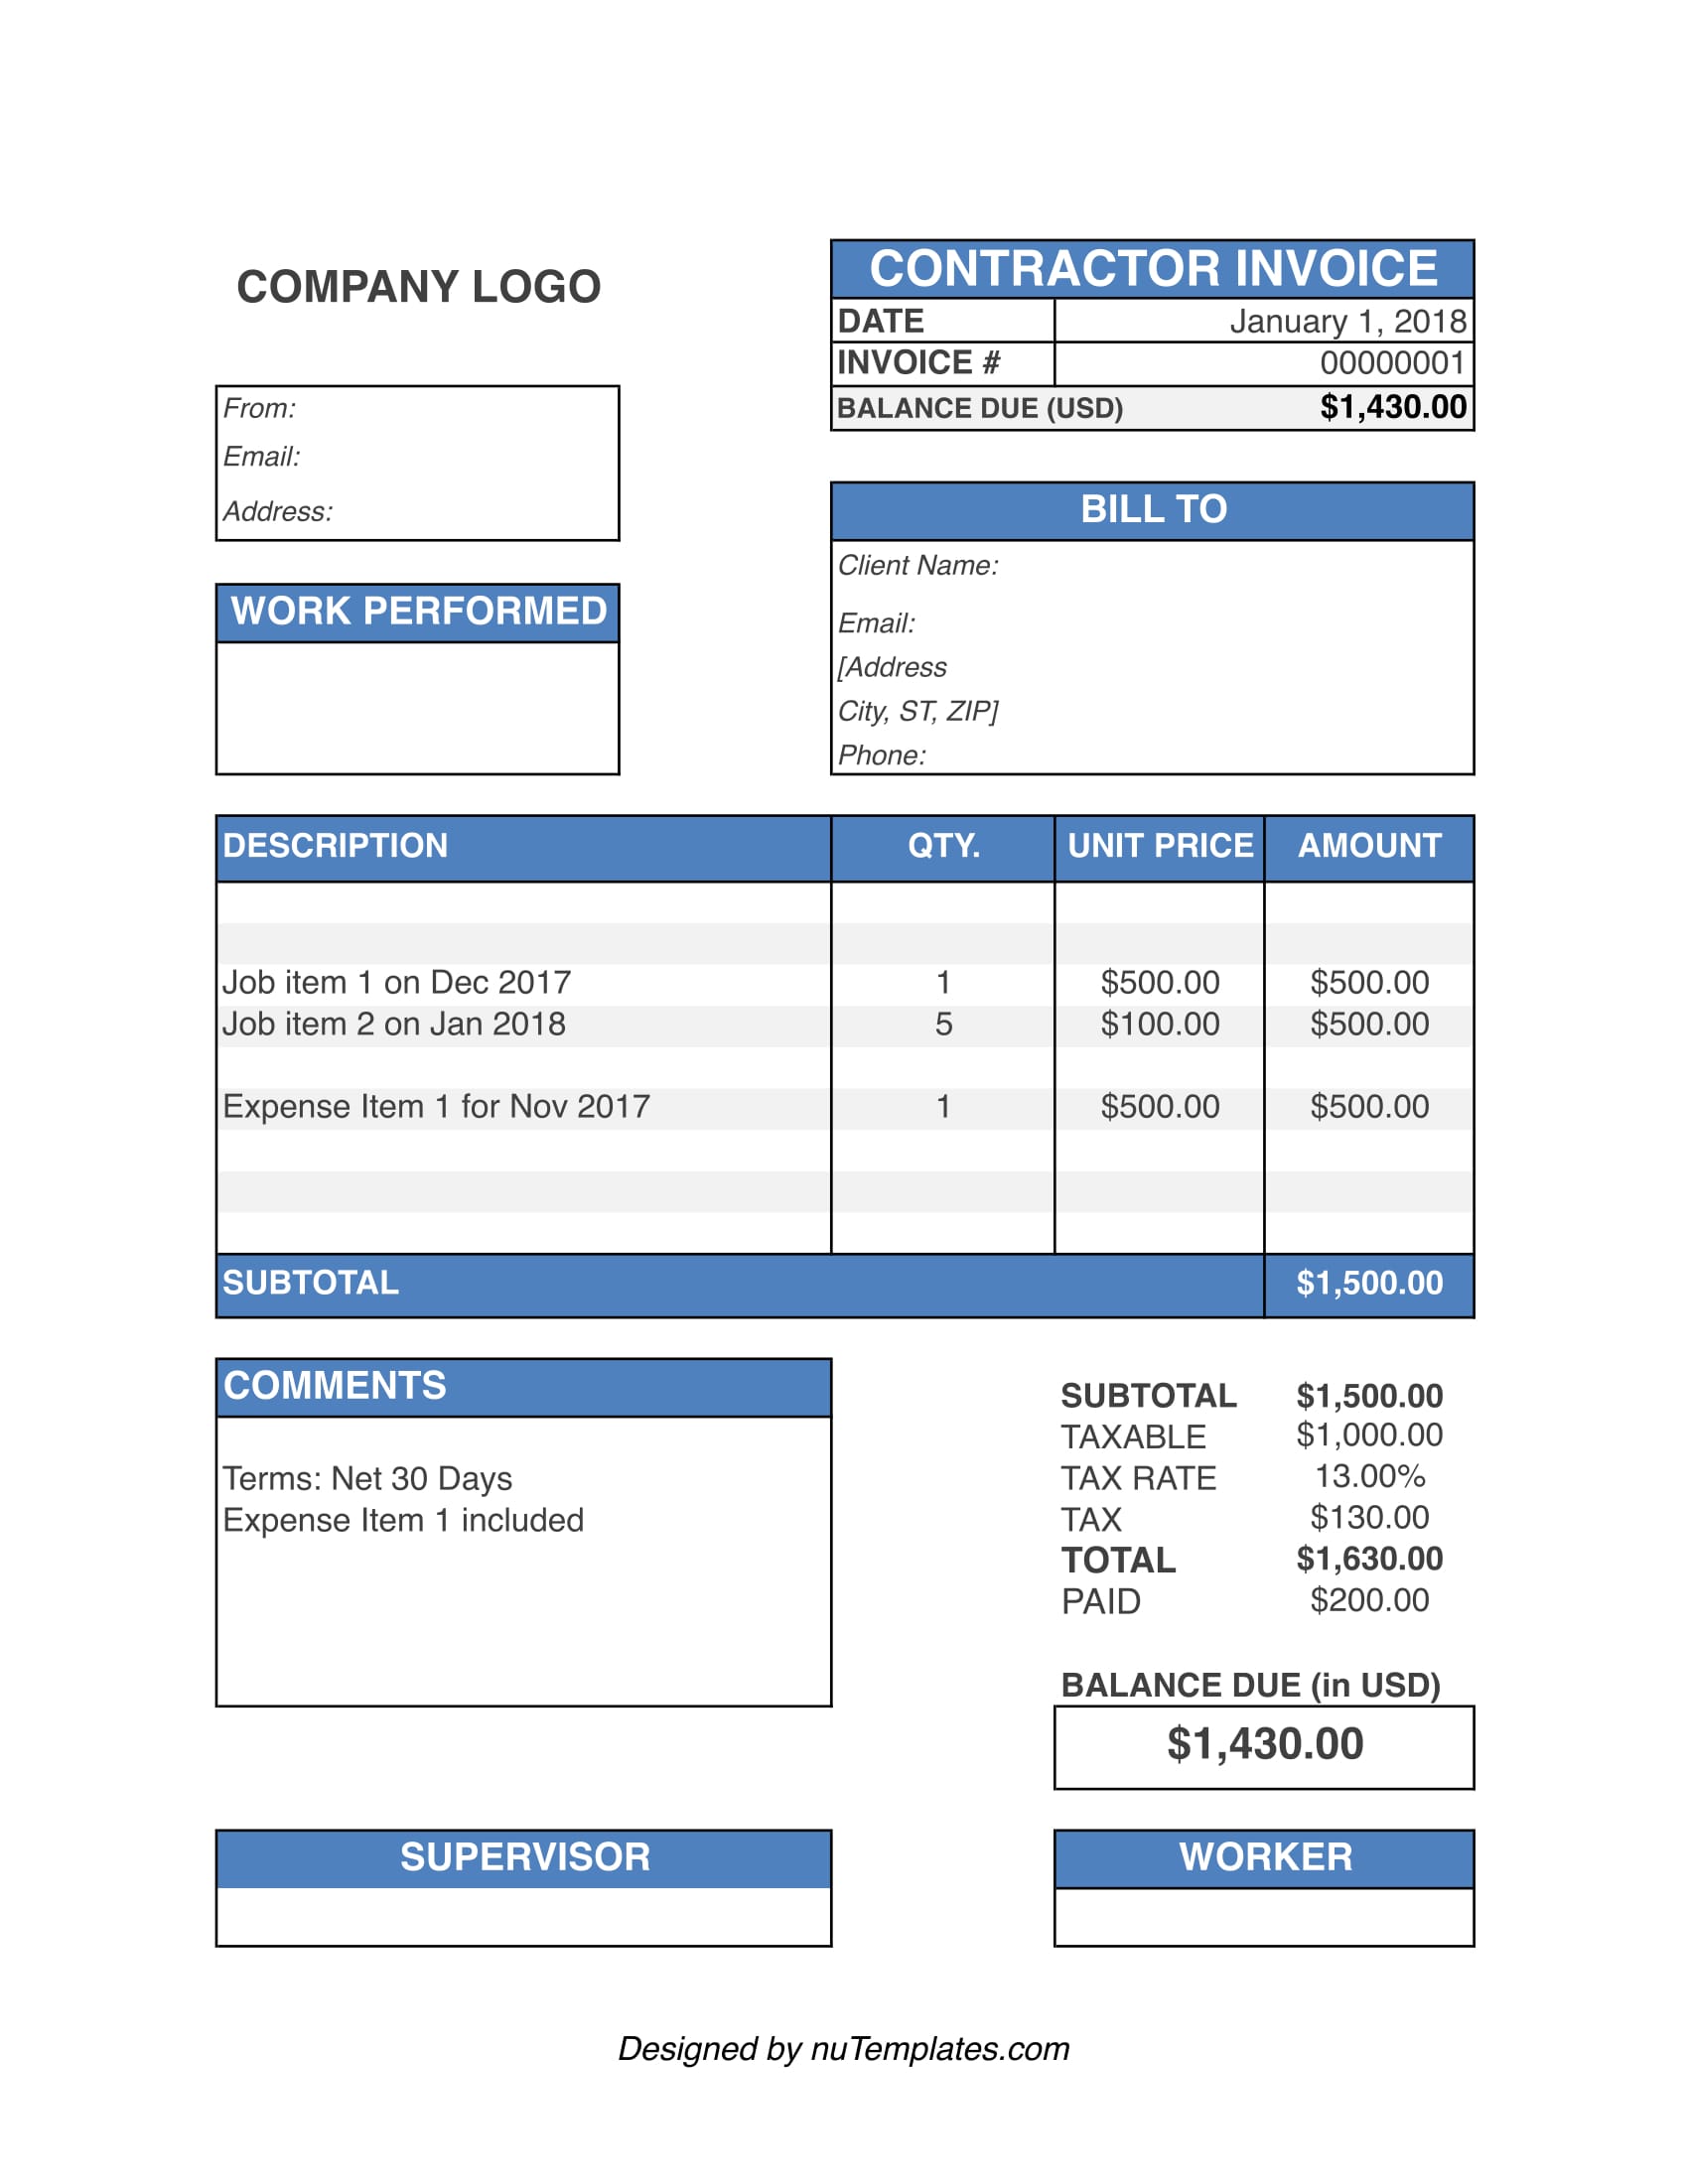 contractor invoice template img